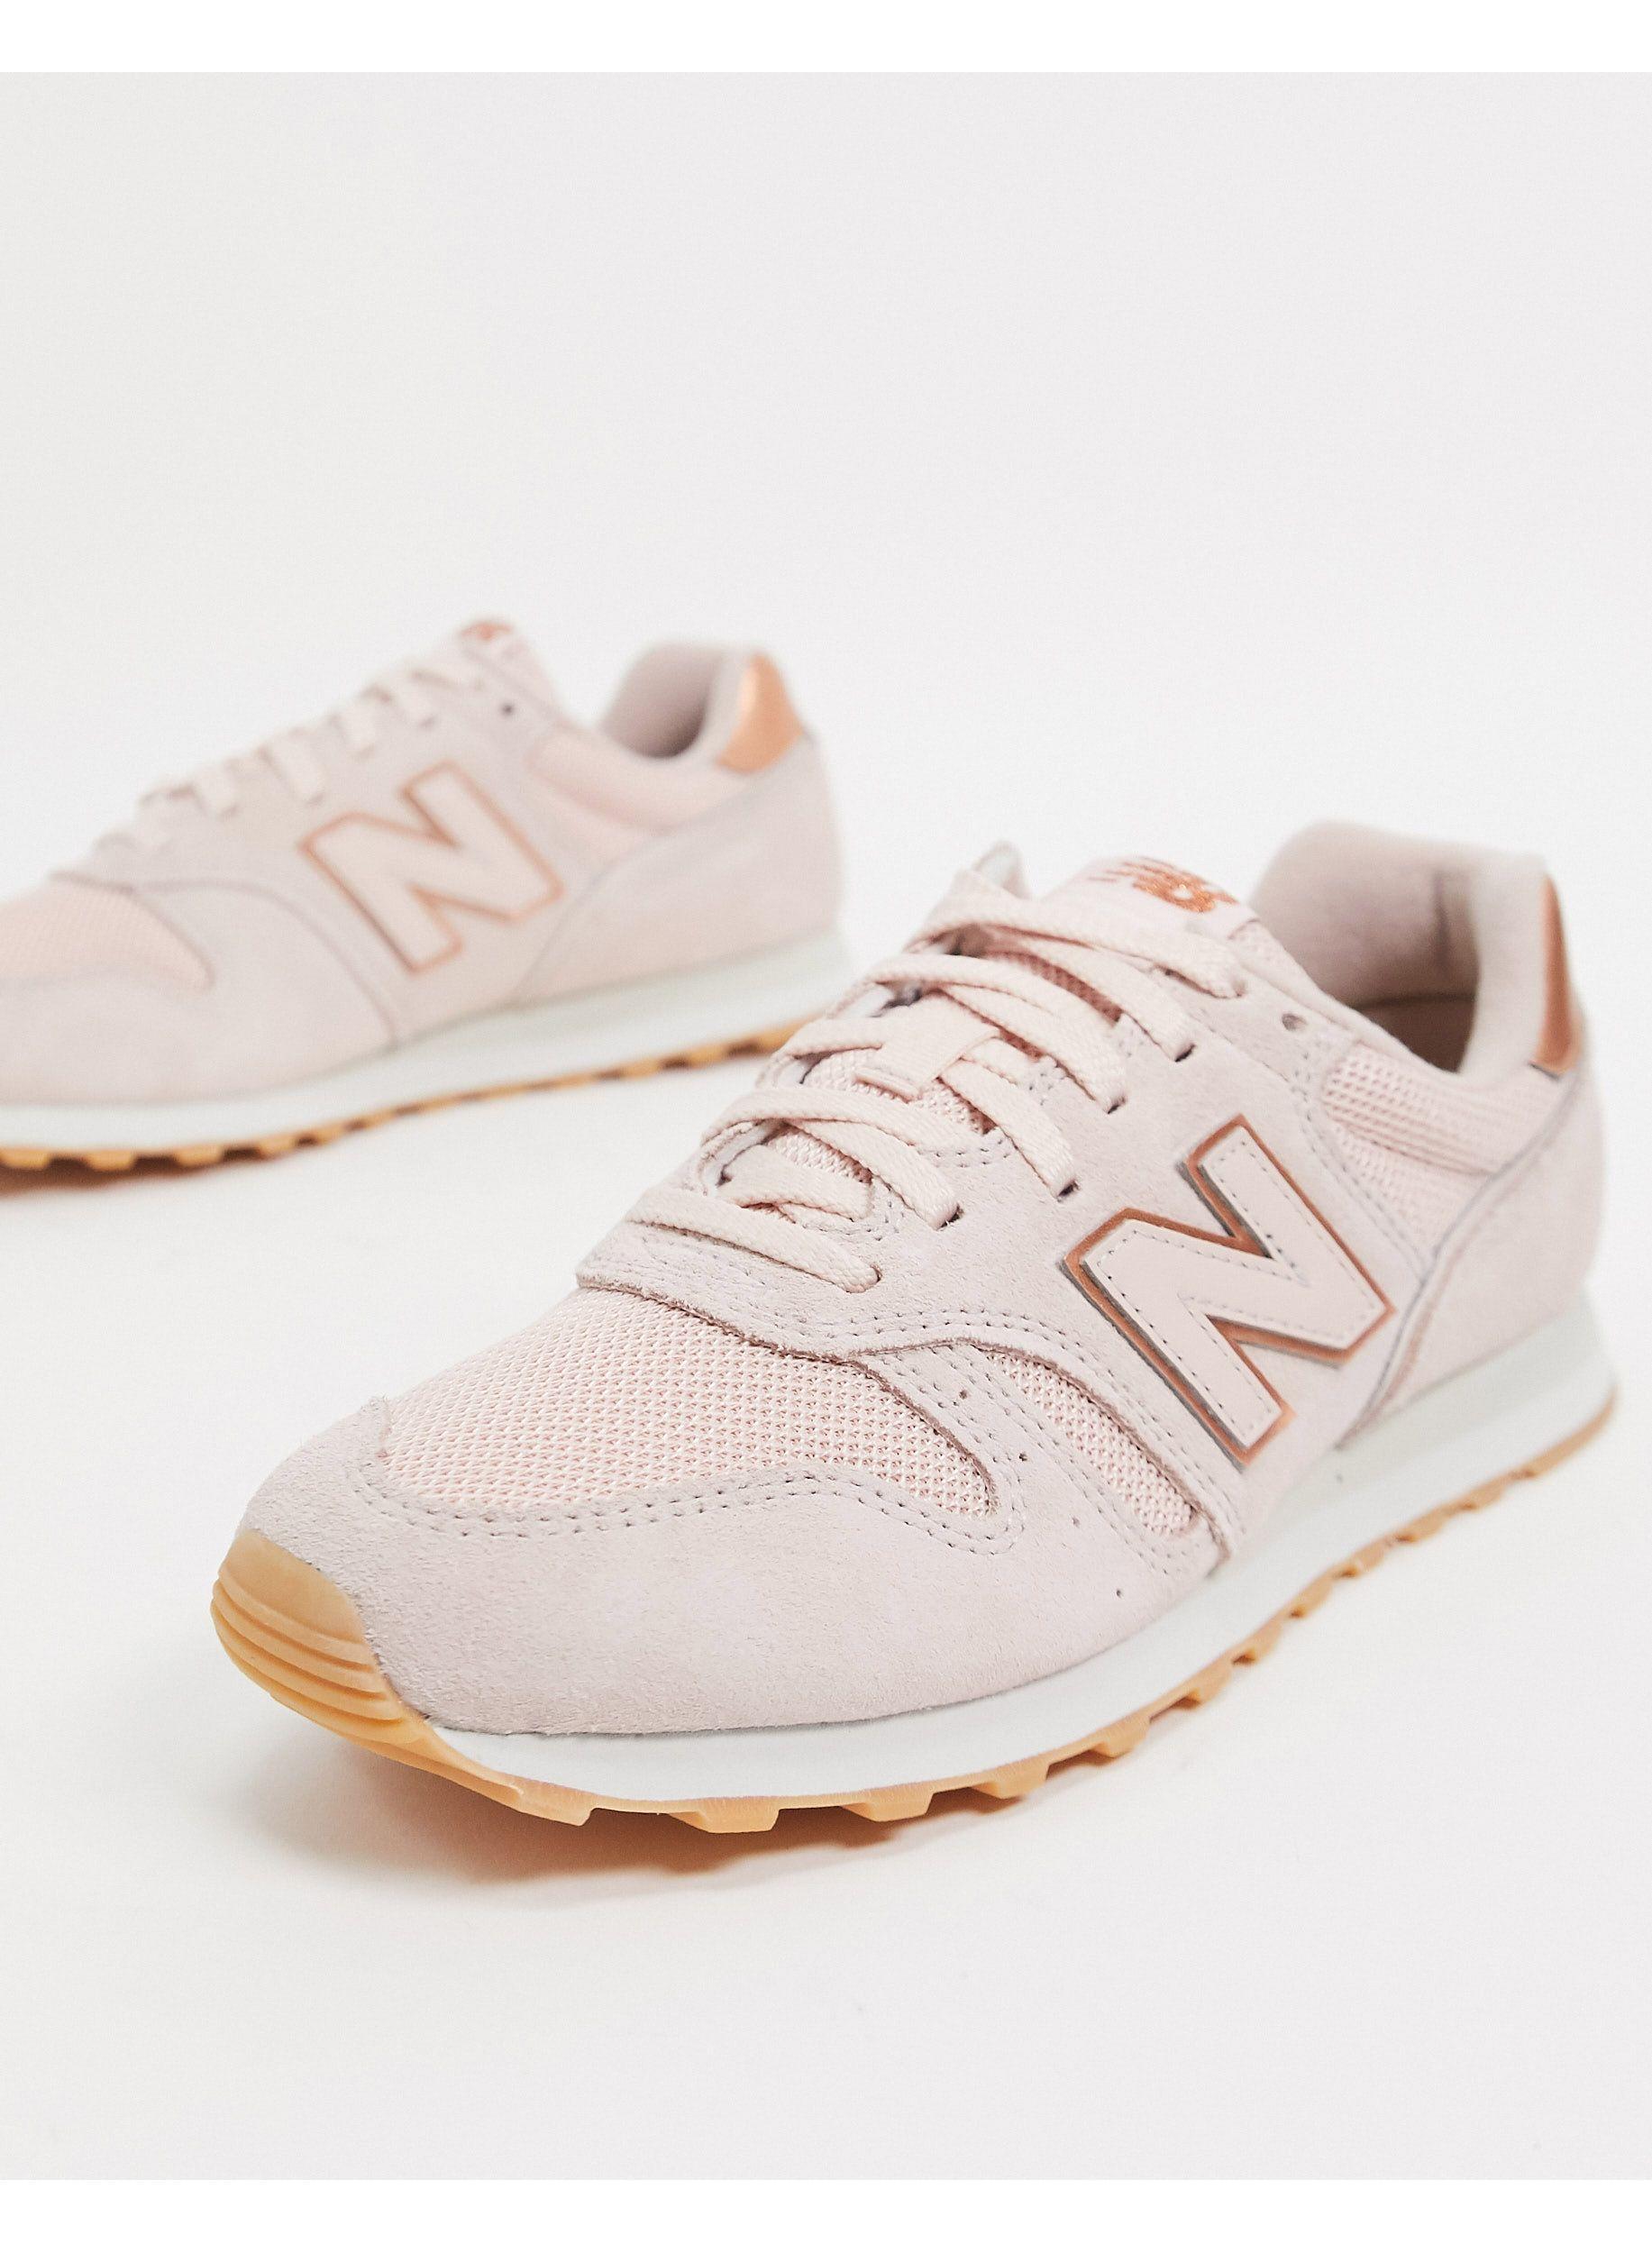 New Balance 373 Womens / Rose Gold Trainers | Lyst